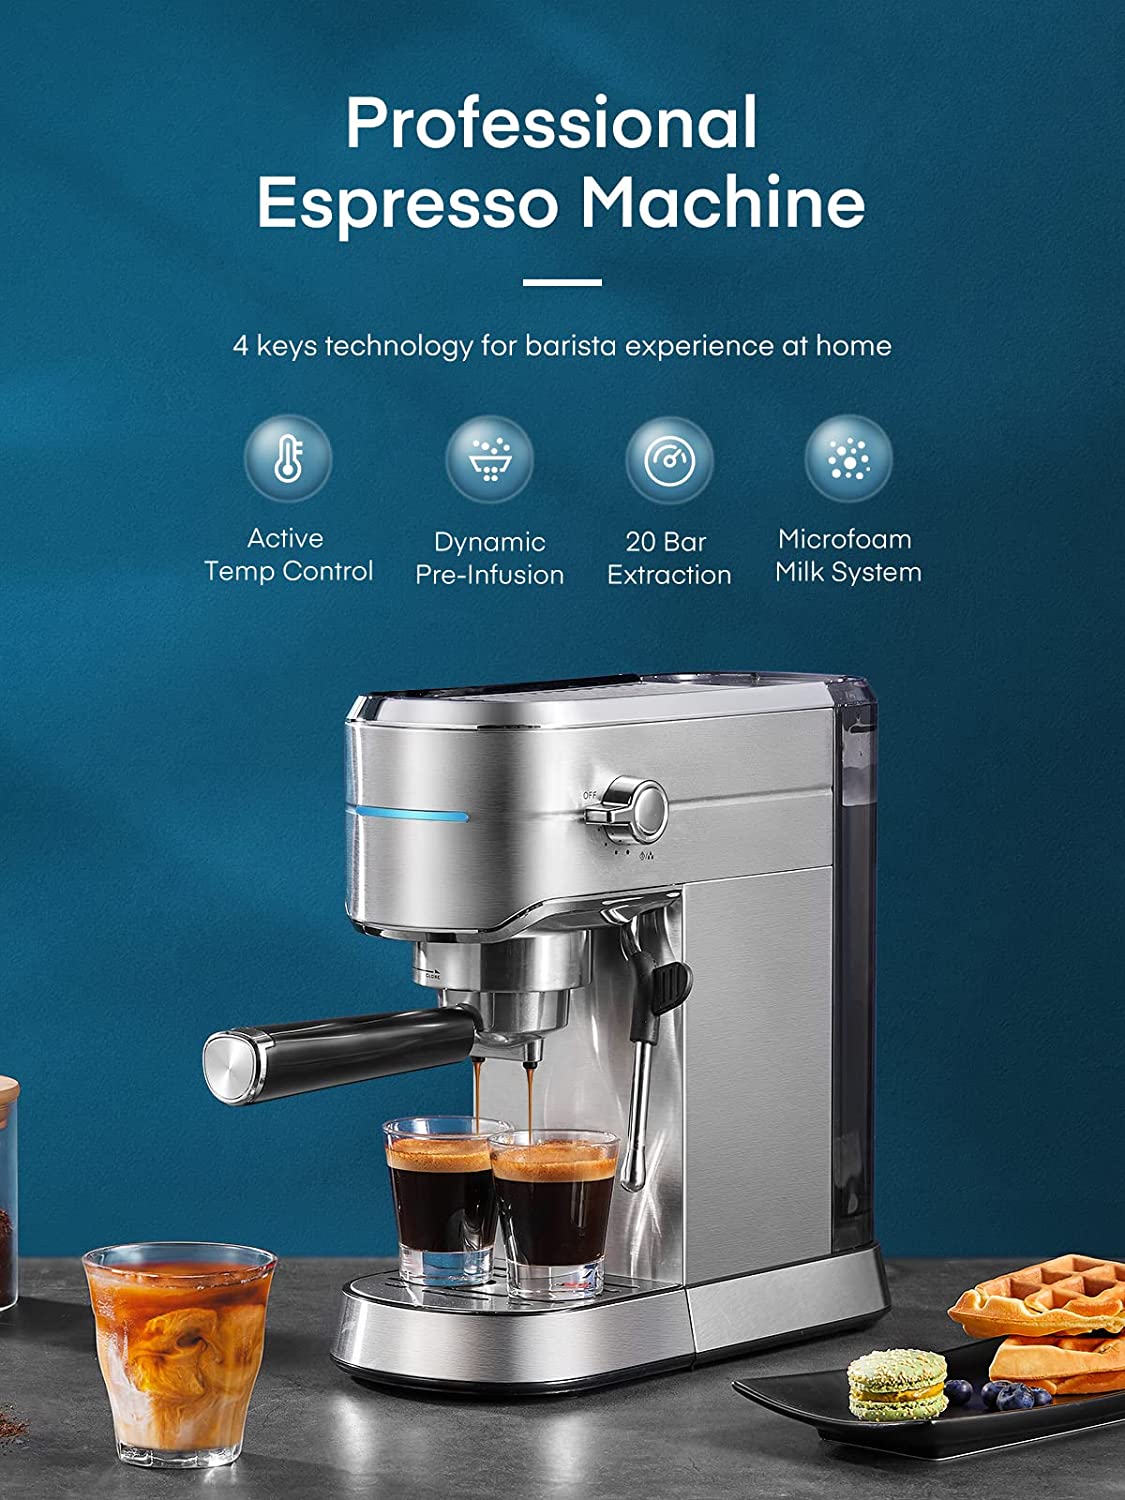 professional espresso machine, HOUSNAT Espresso Machine, 20 Bar Espresso and Cappuccino Maker with Milk Frother Steam Wand, Professional Espresso Coffee Machine for Cappuccino and Latte, Compact Design, Brushed Stainless Steel